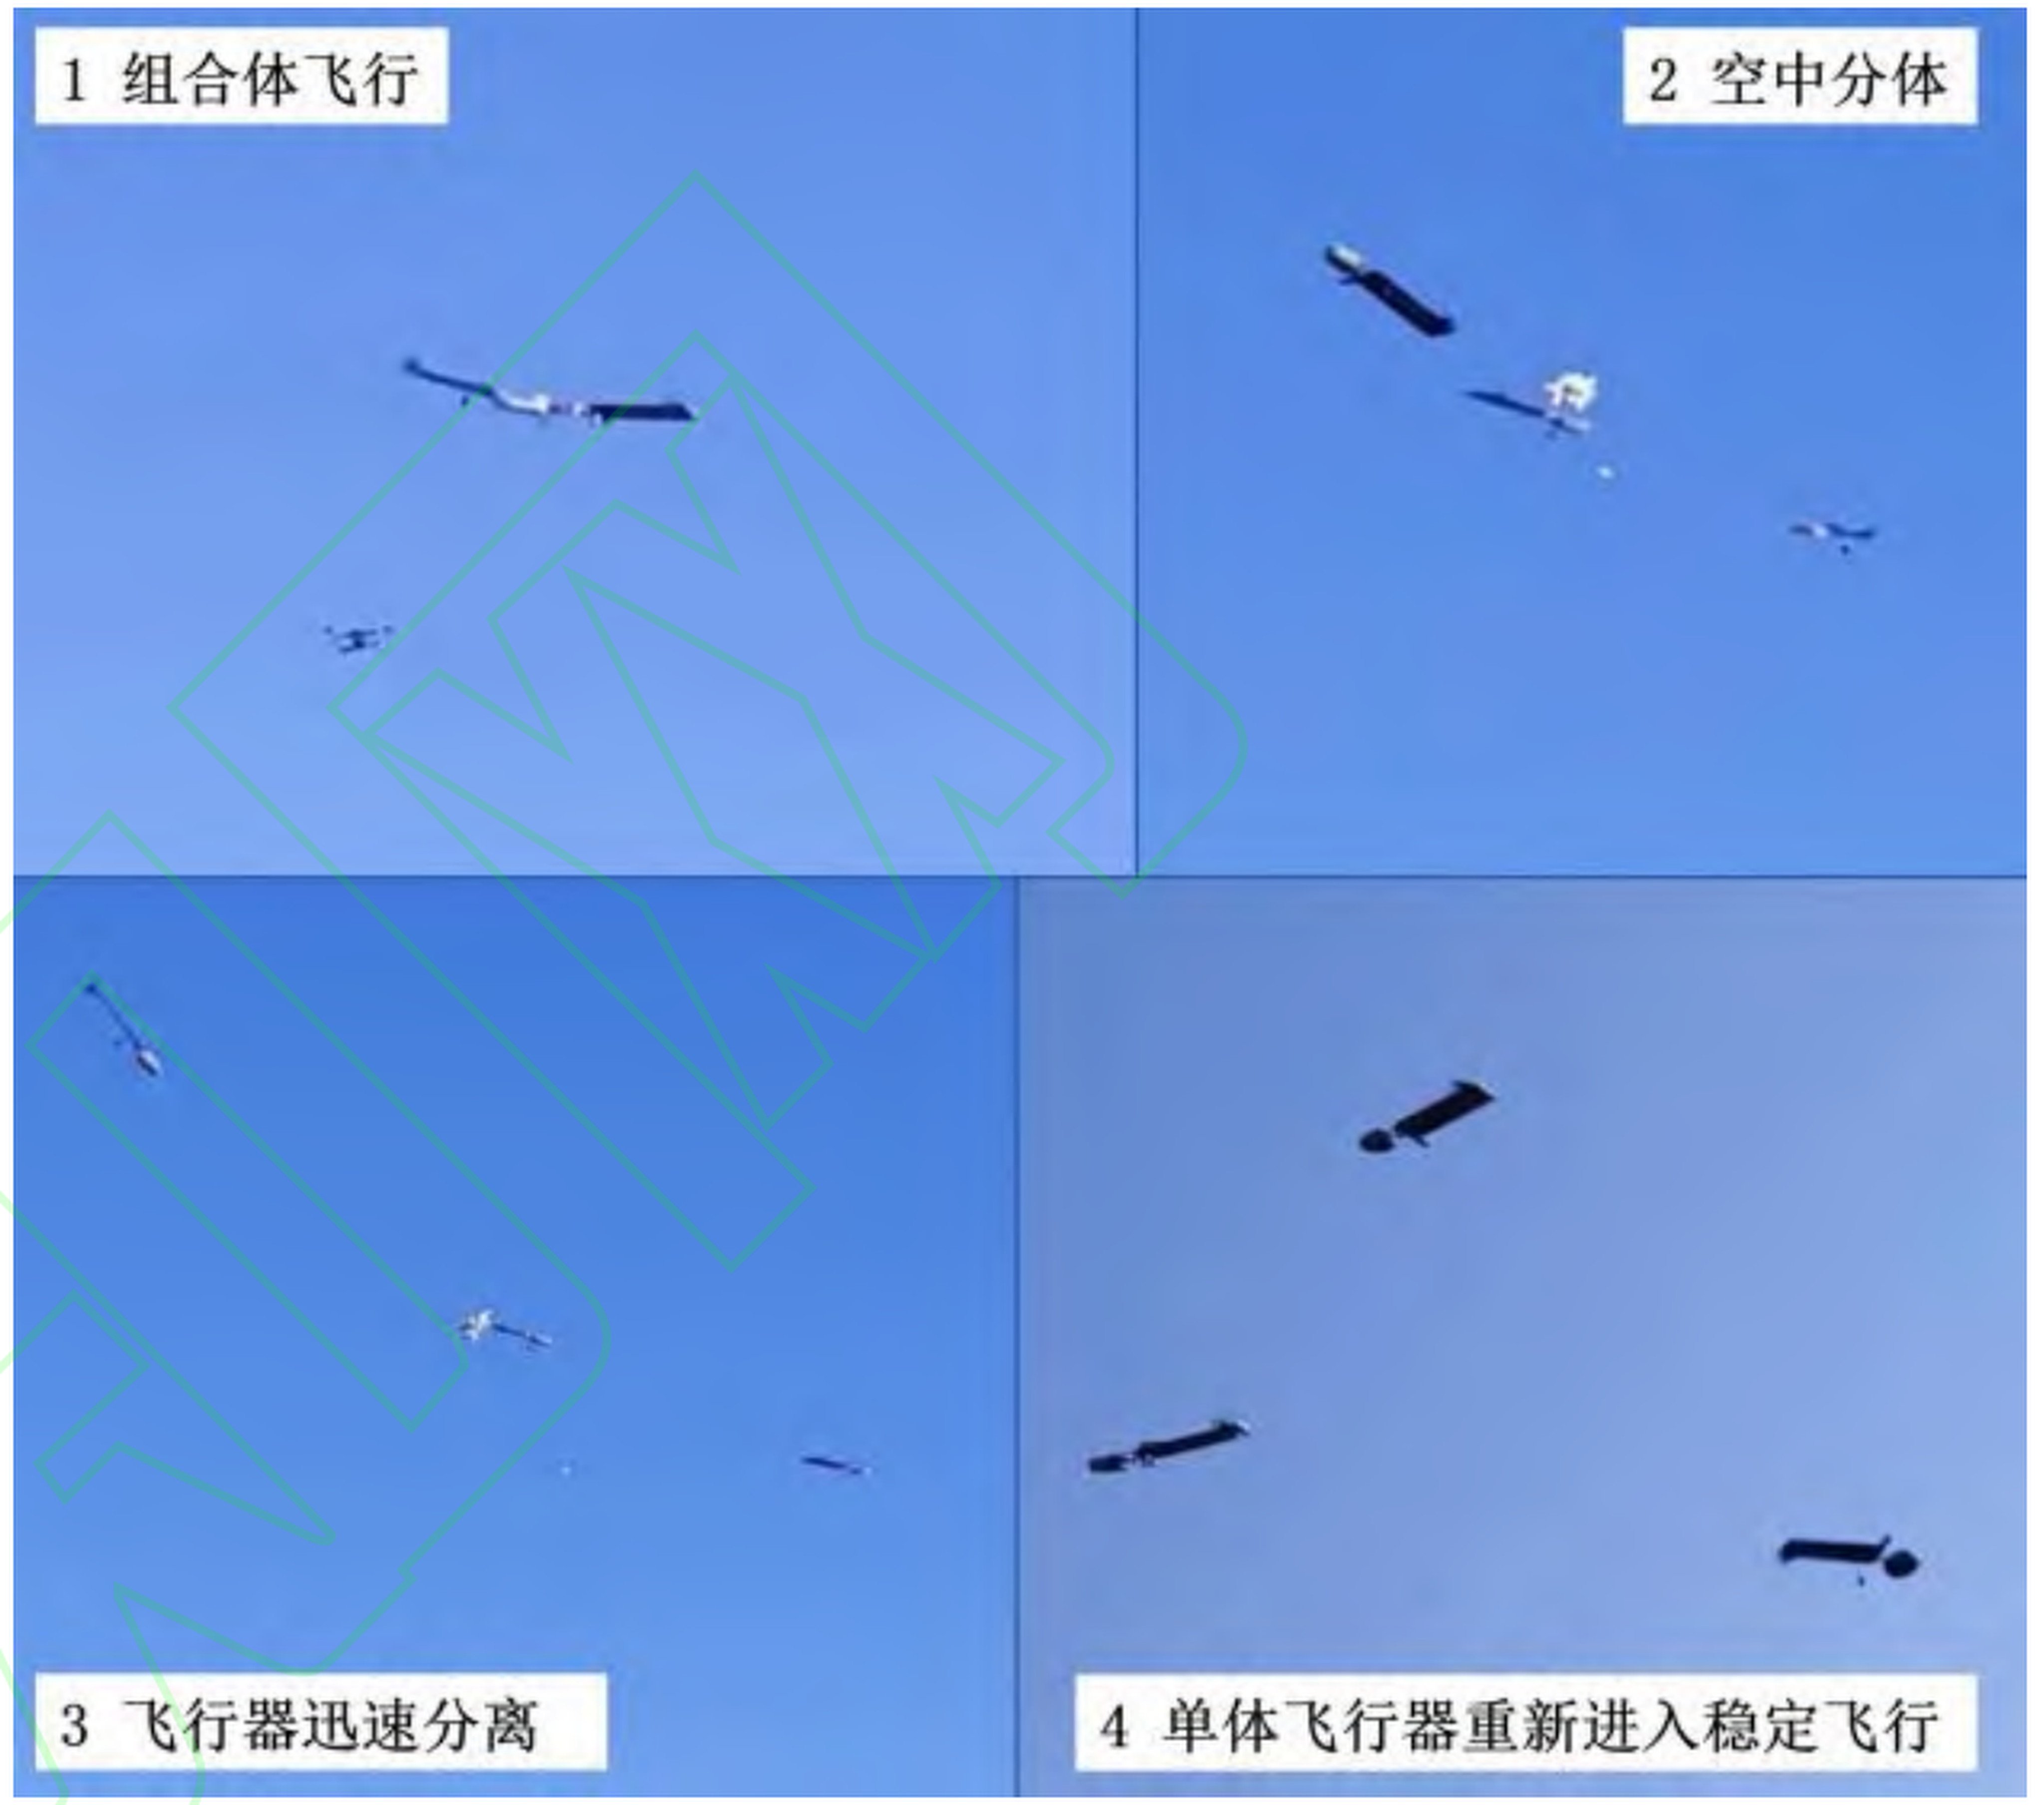 Chinese scientists report they have developed a drone that can rapidly split apart into multiple smaller drones as necessary. Photo: Nanjing University of Aeronautics and Astronautics